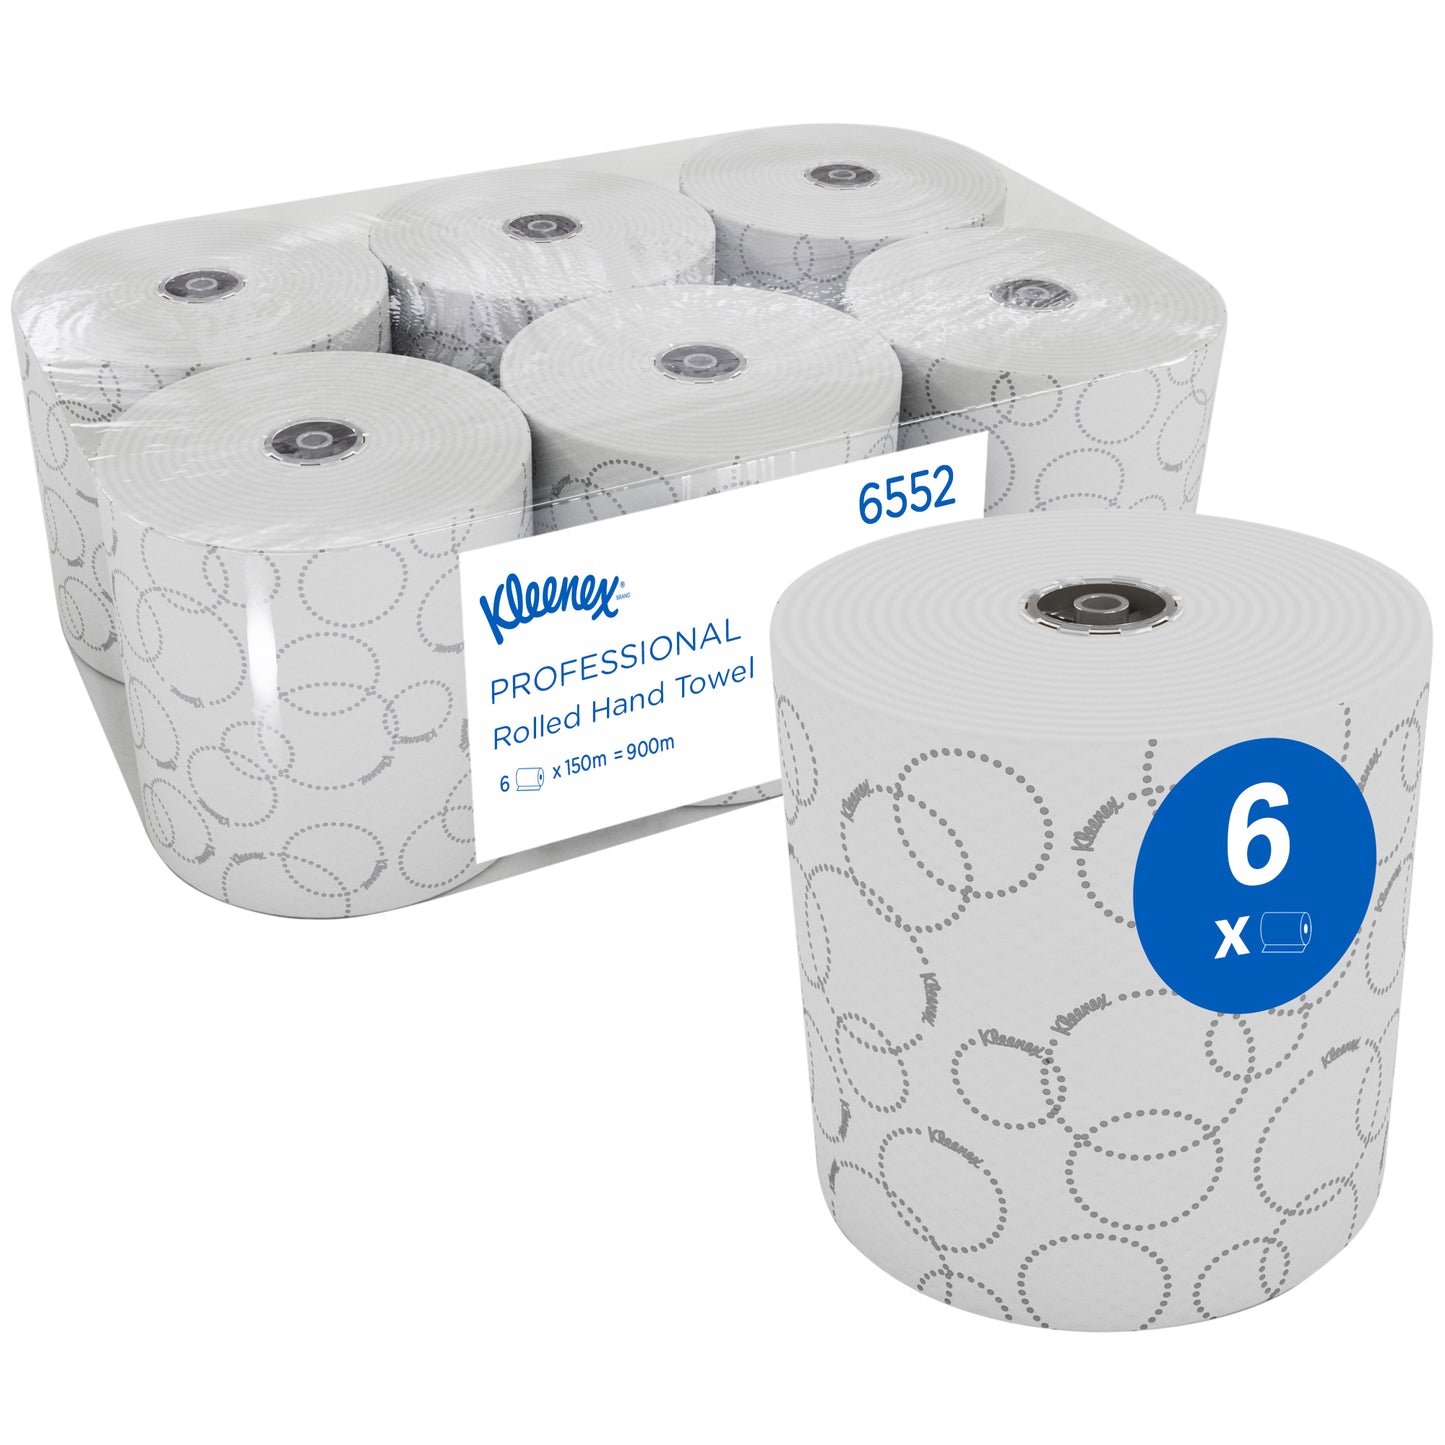 KIMBERLY-CLARK KLEENEX Rolled Hand Towel - 2 Ply (Pack of 6 Rolls) (Code 6552)